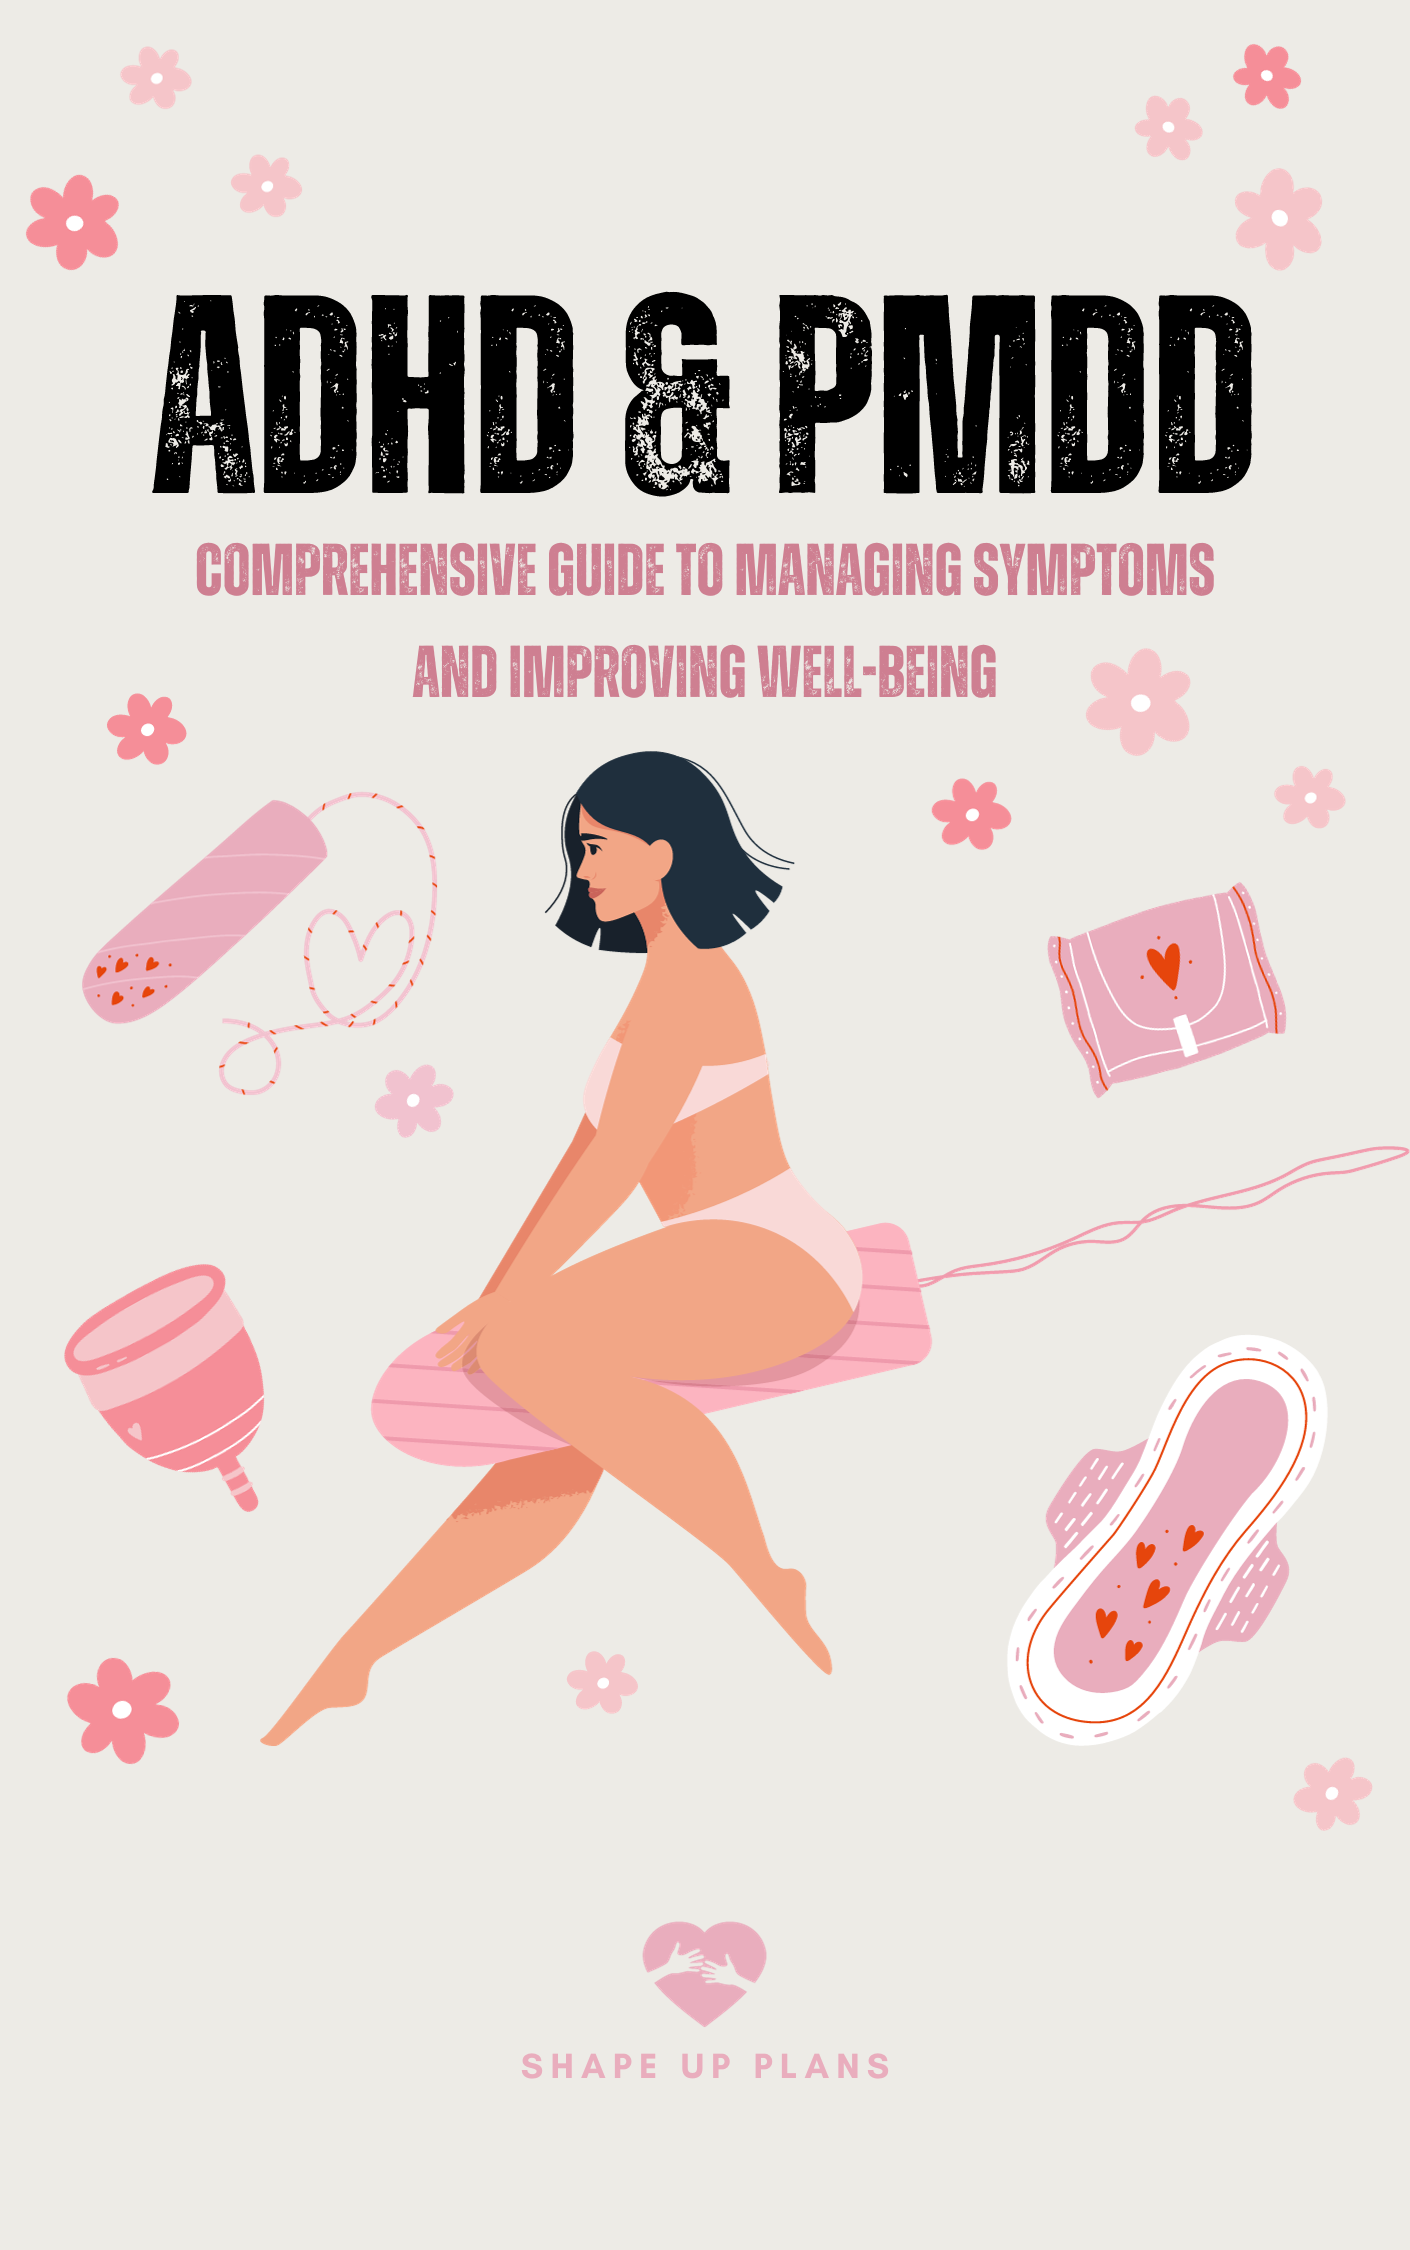 ADHD and PMDD: A Comprehensive Guide to Managing Symptoms and Improving Well-Being